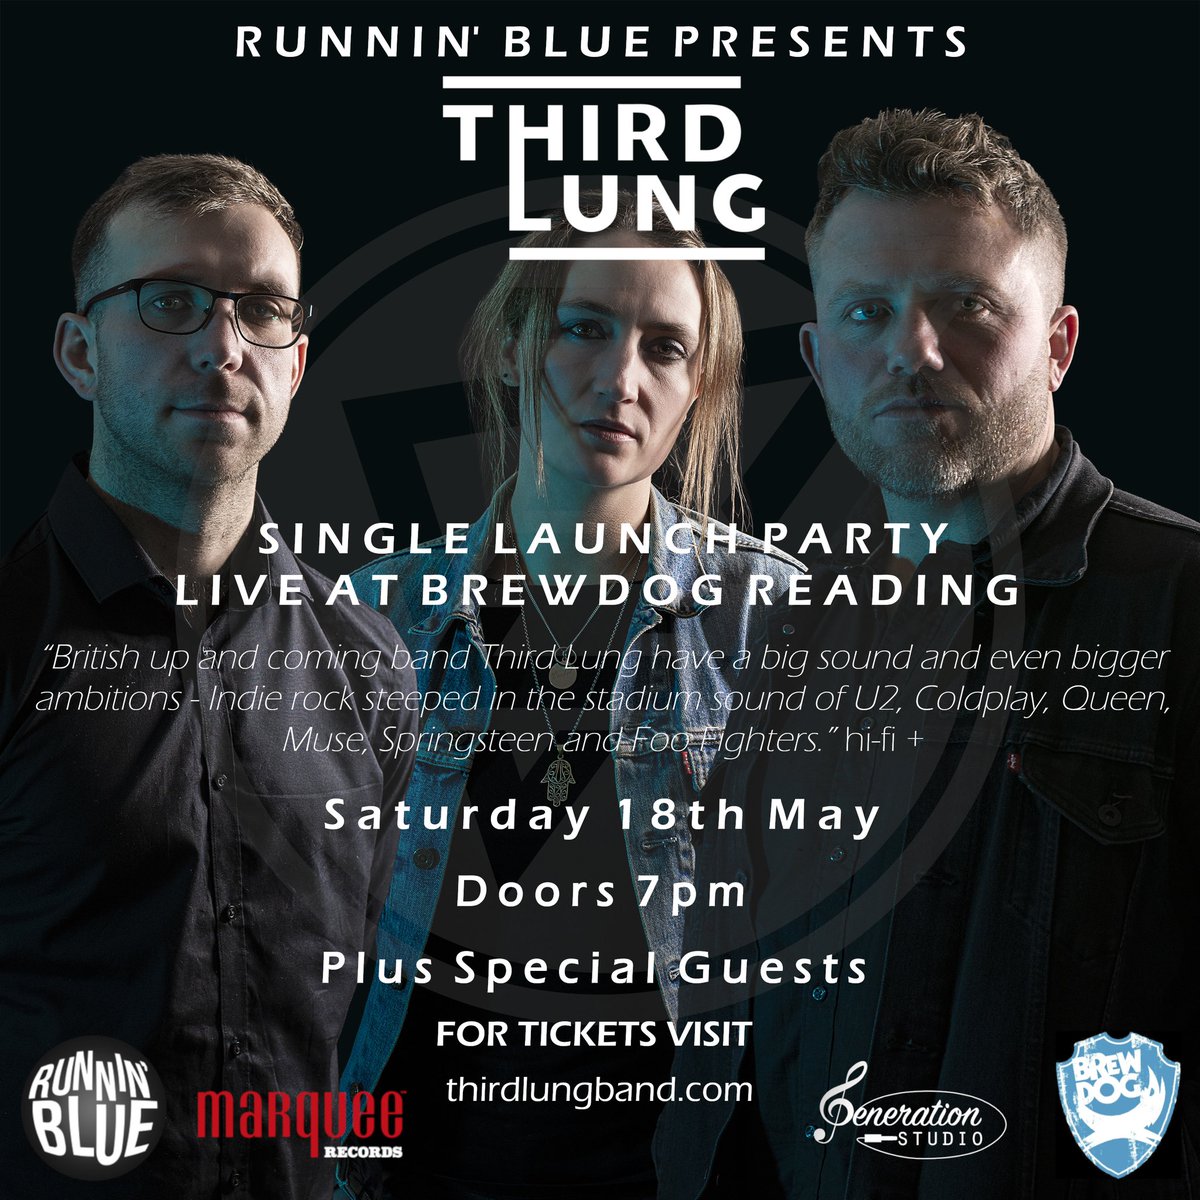 NEW SHOW!!! Reading you lucky people THIRD LUNG are back at BrewDog Reading for their new single launch. Don't forget the last time they played here it sold out so don't hang about and grab those tickets. wegottickets.com/event/617940 Thirdlungband.com